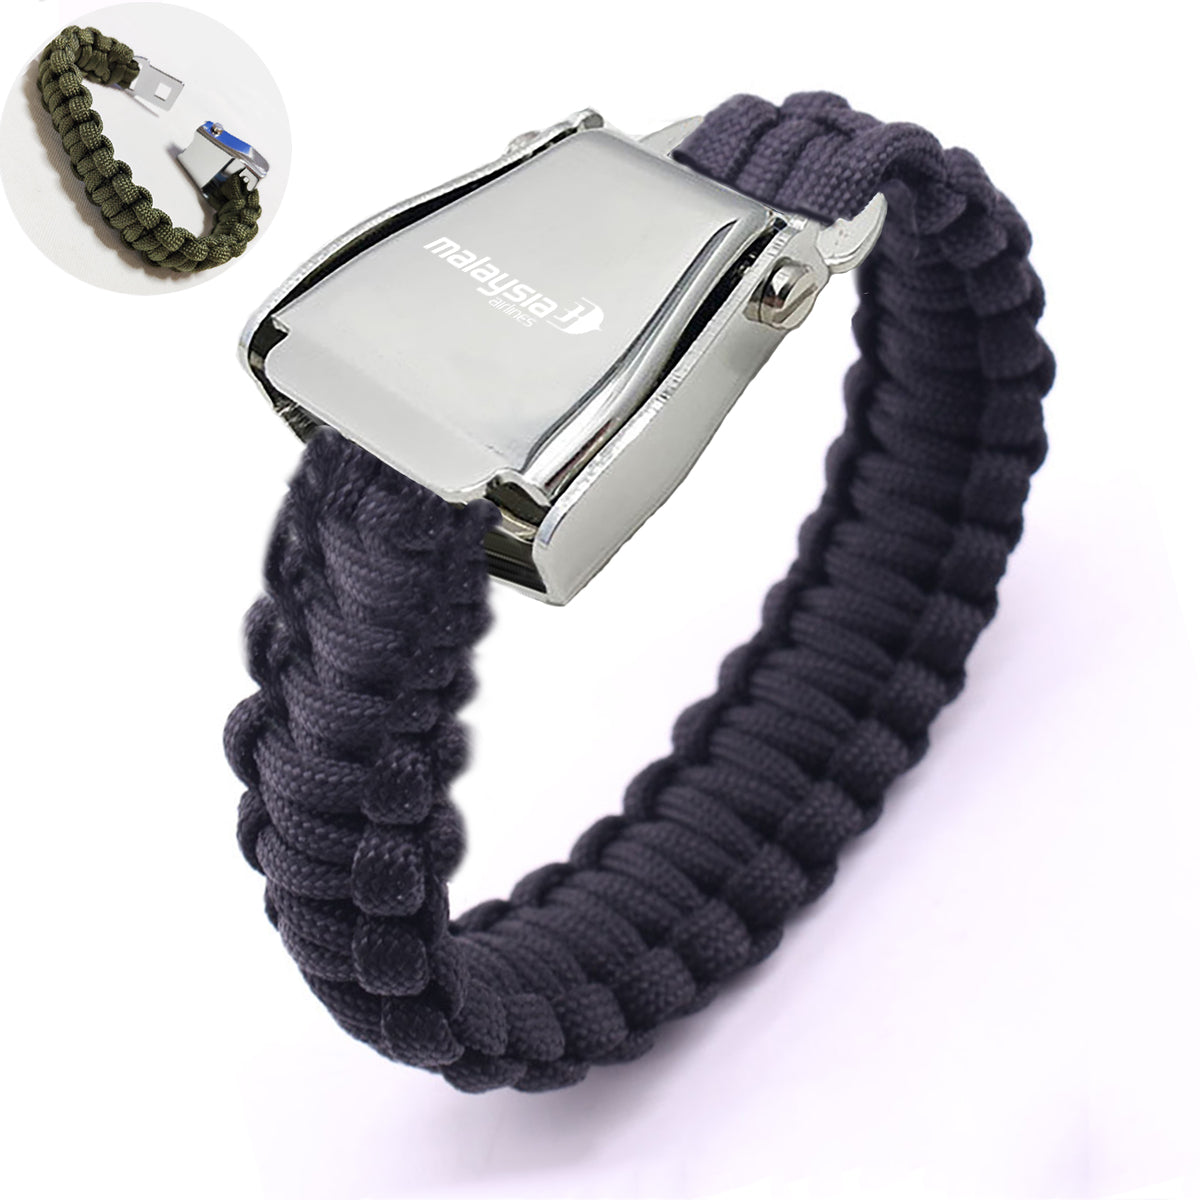 Malaysia Airlines Design Airplane Seat Belt Bracelet